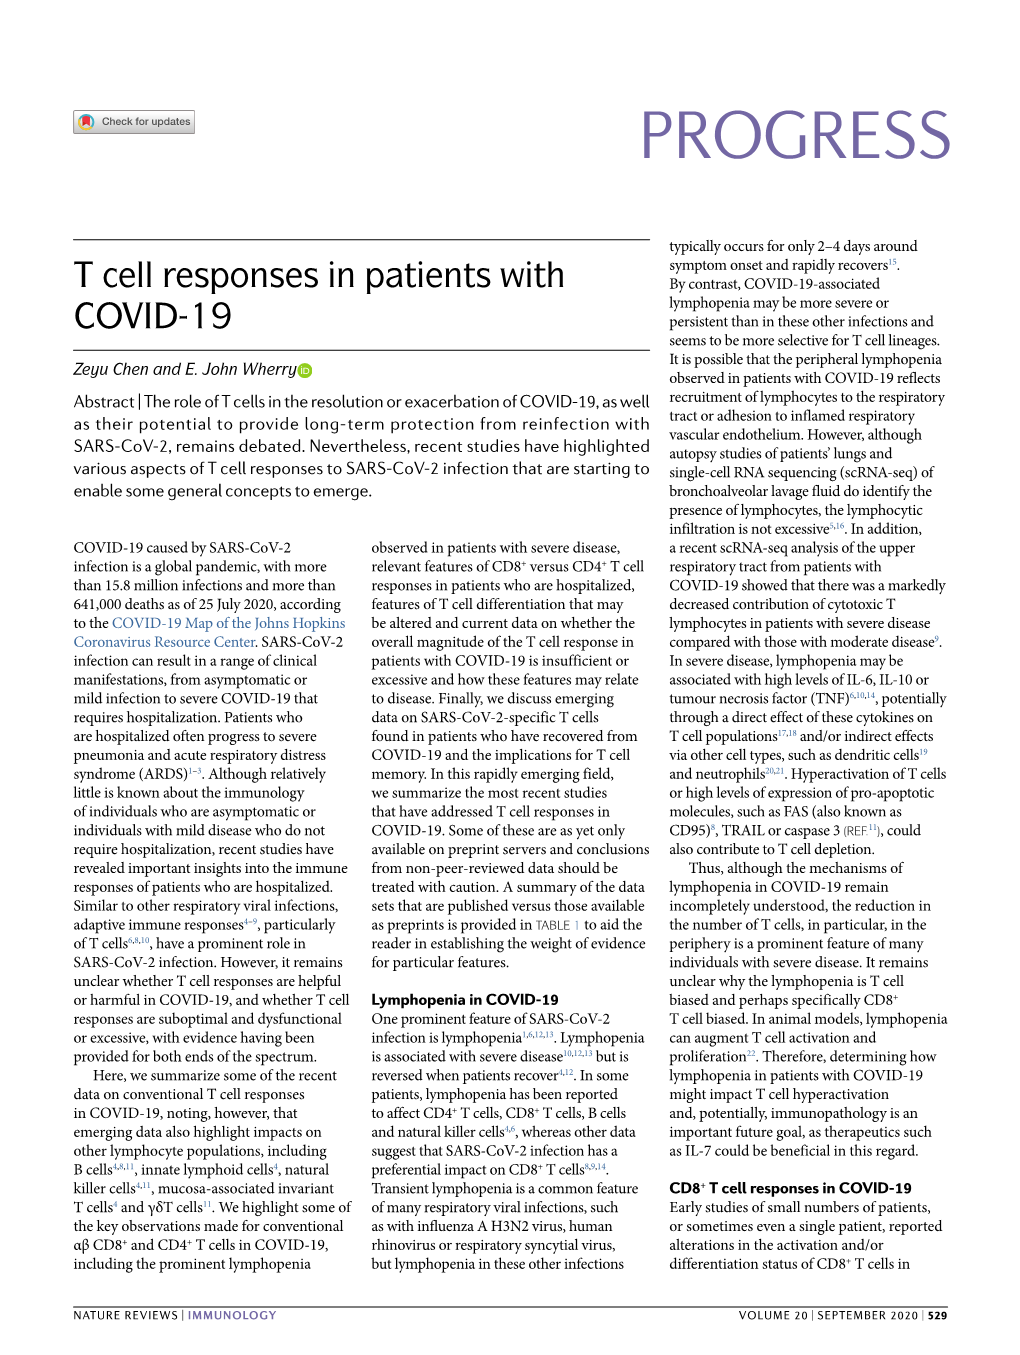 T Cell Responses in Patients with COVID-19